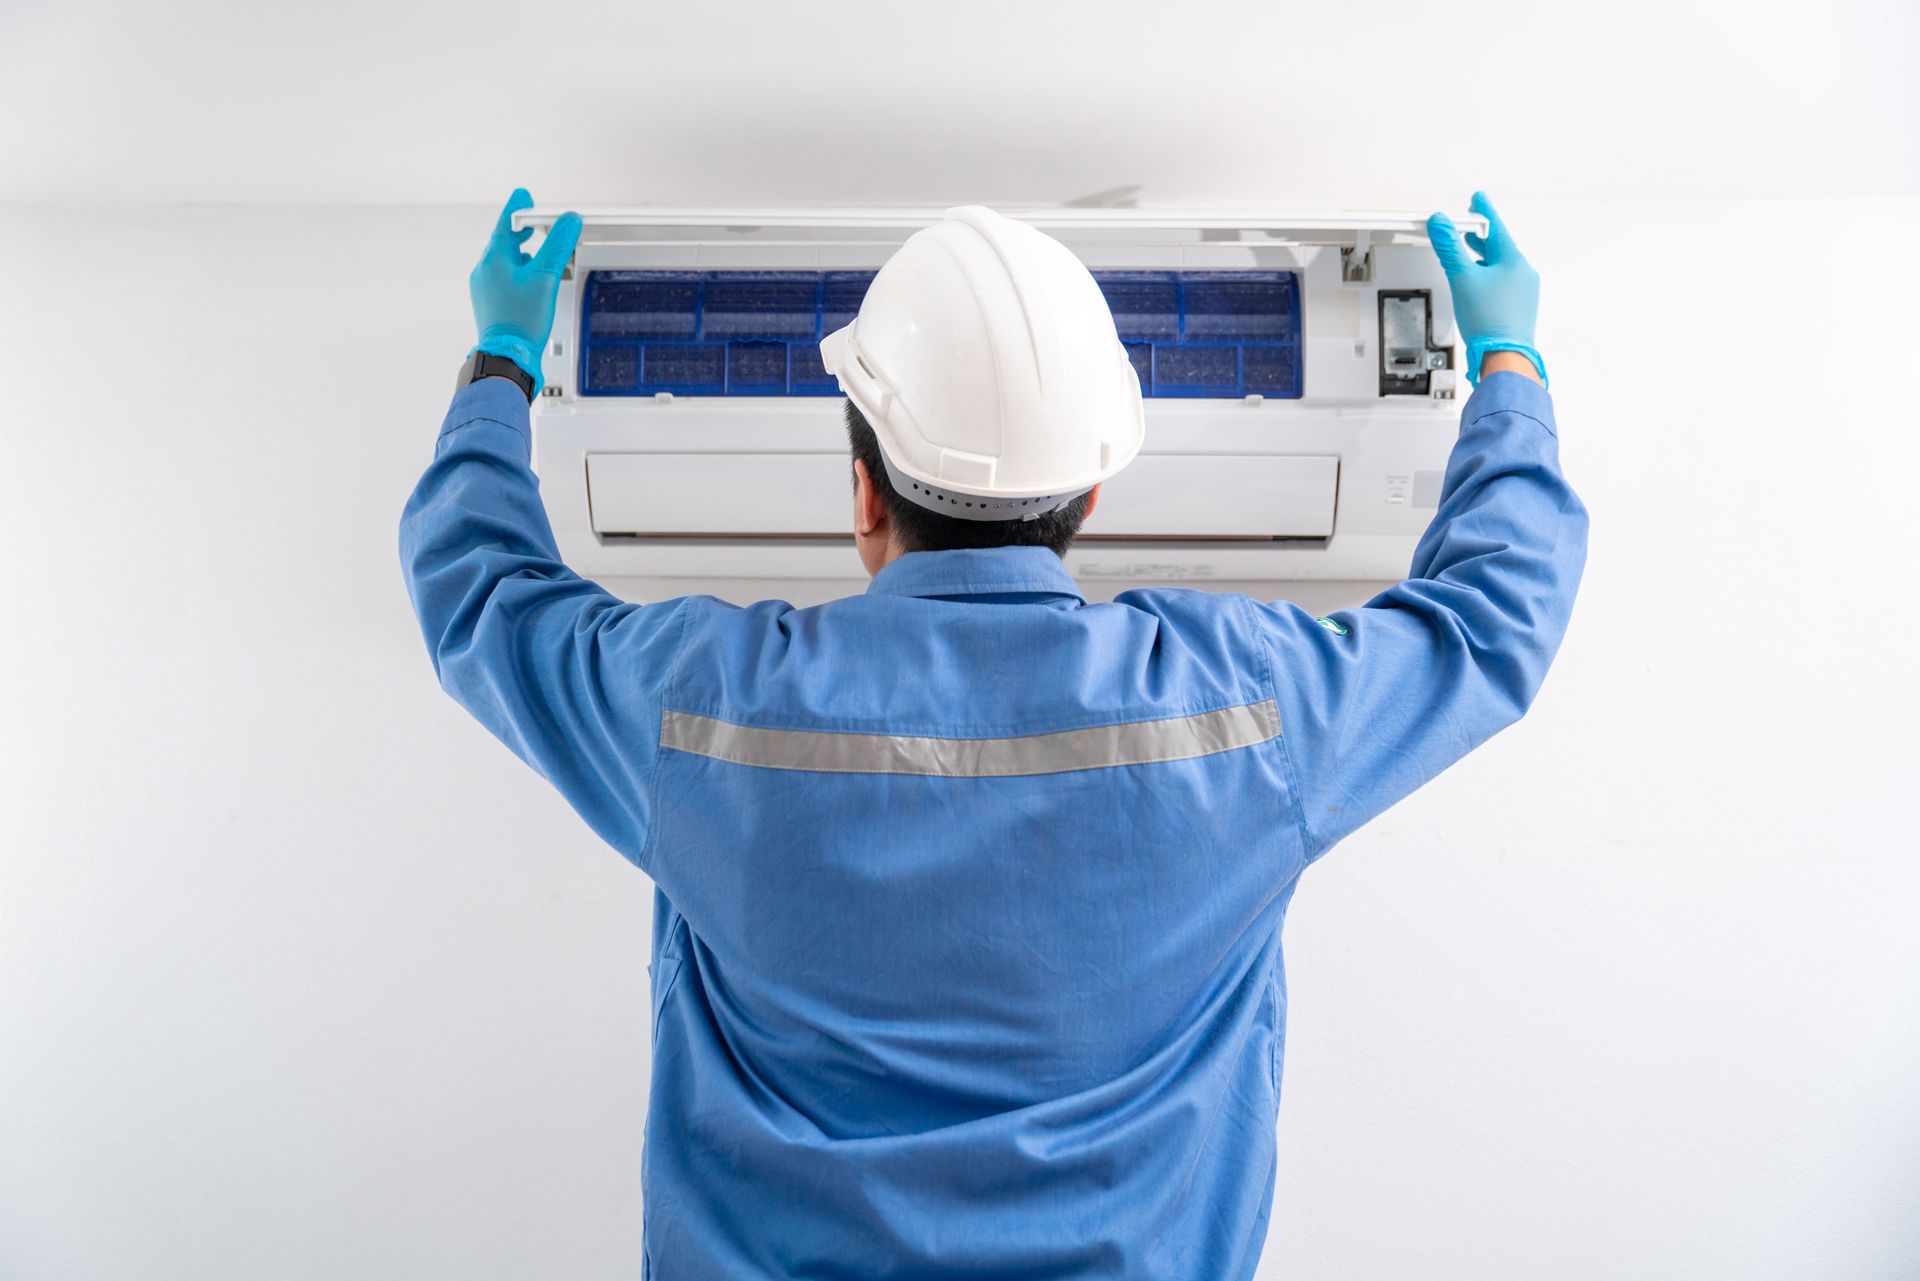 a man wearing a hard hat and gloves is installing an air conditioner .